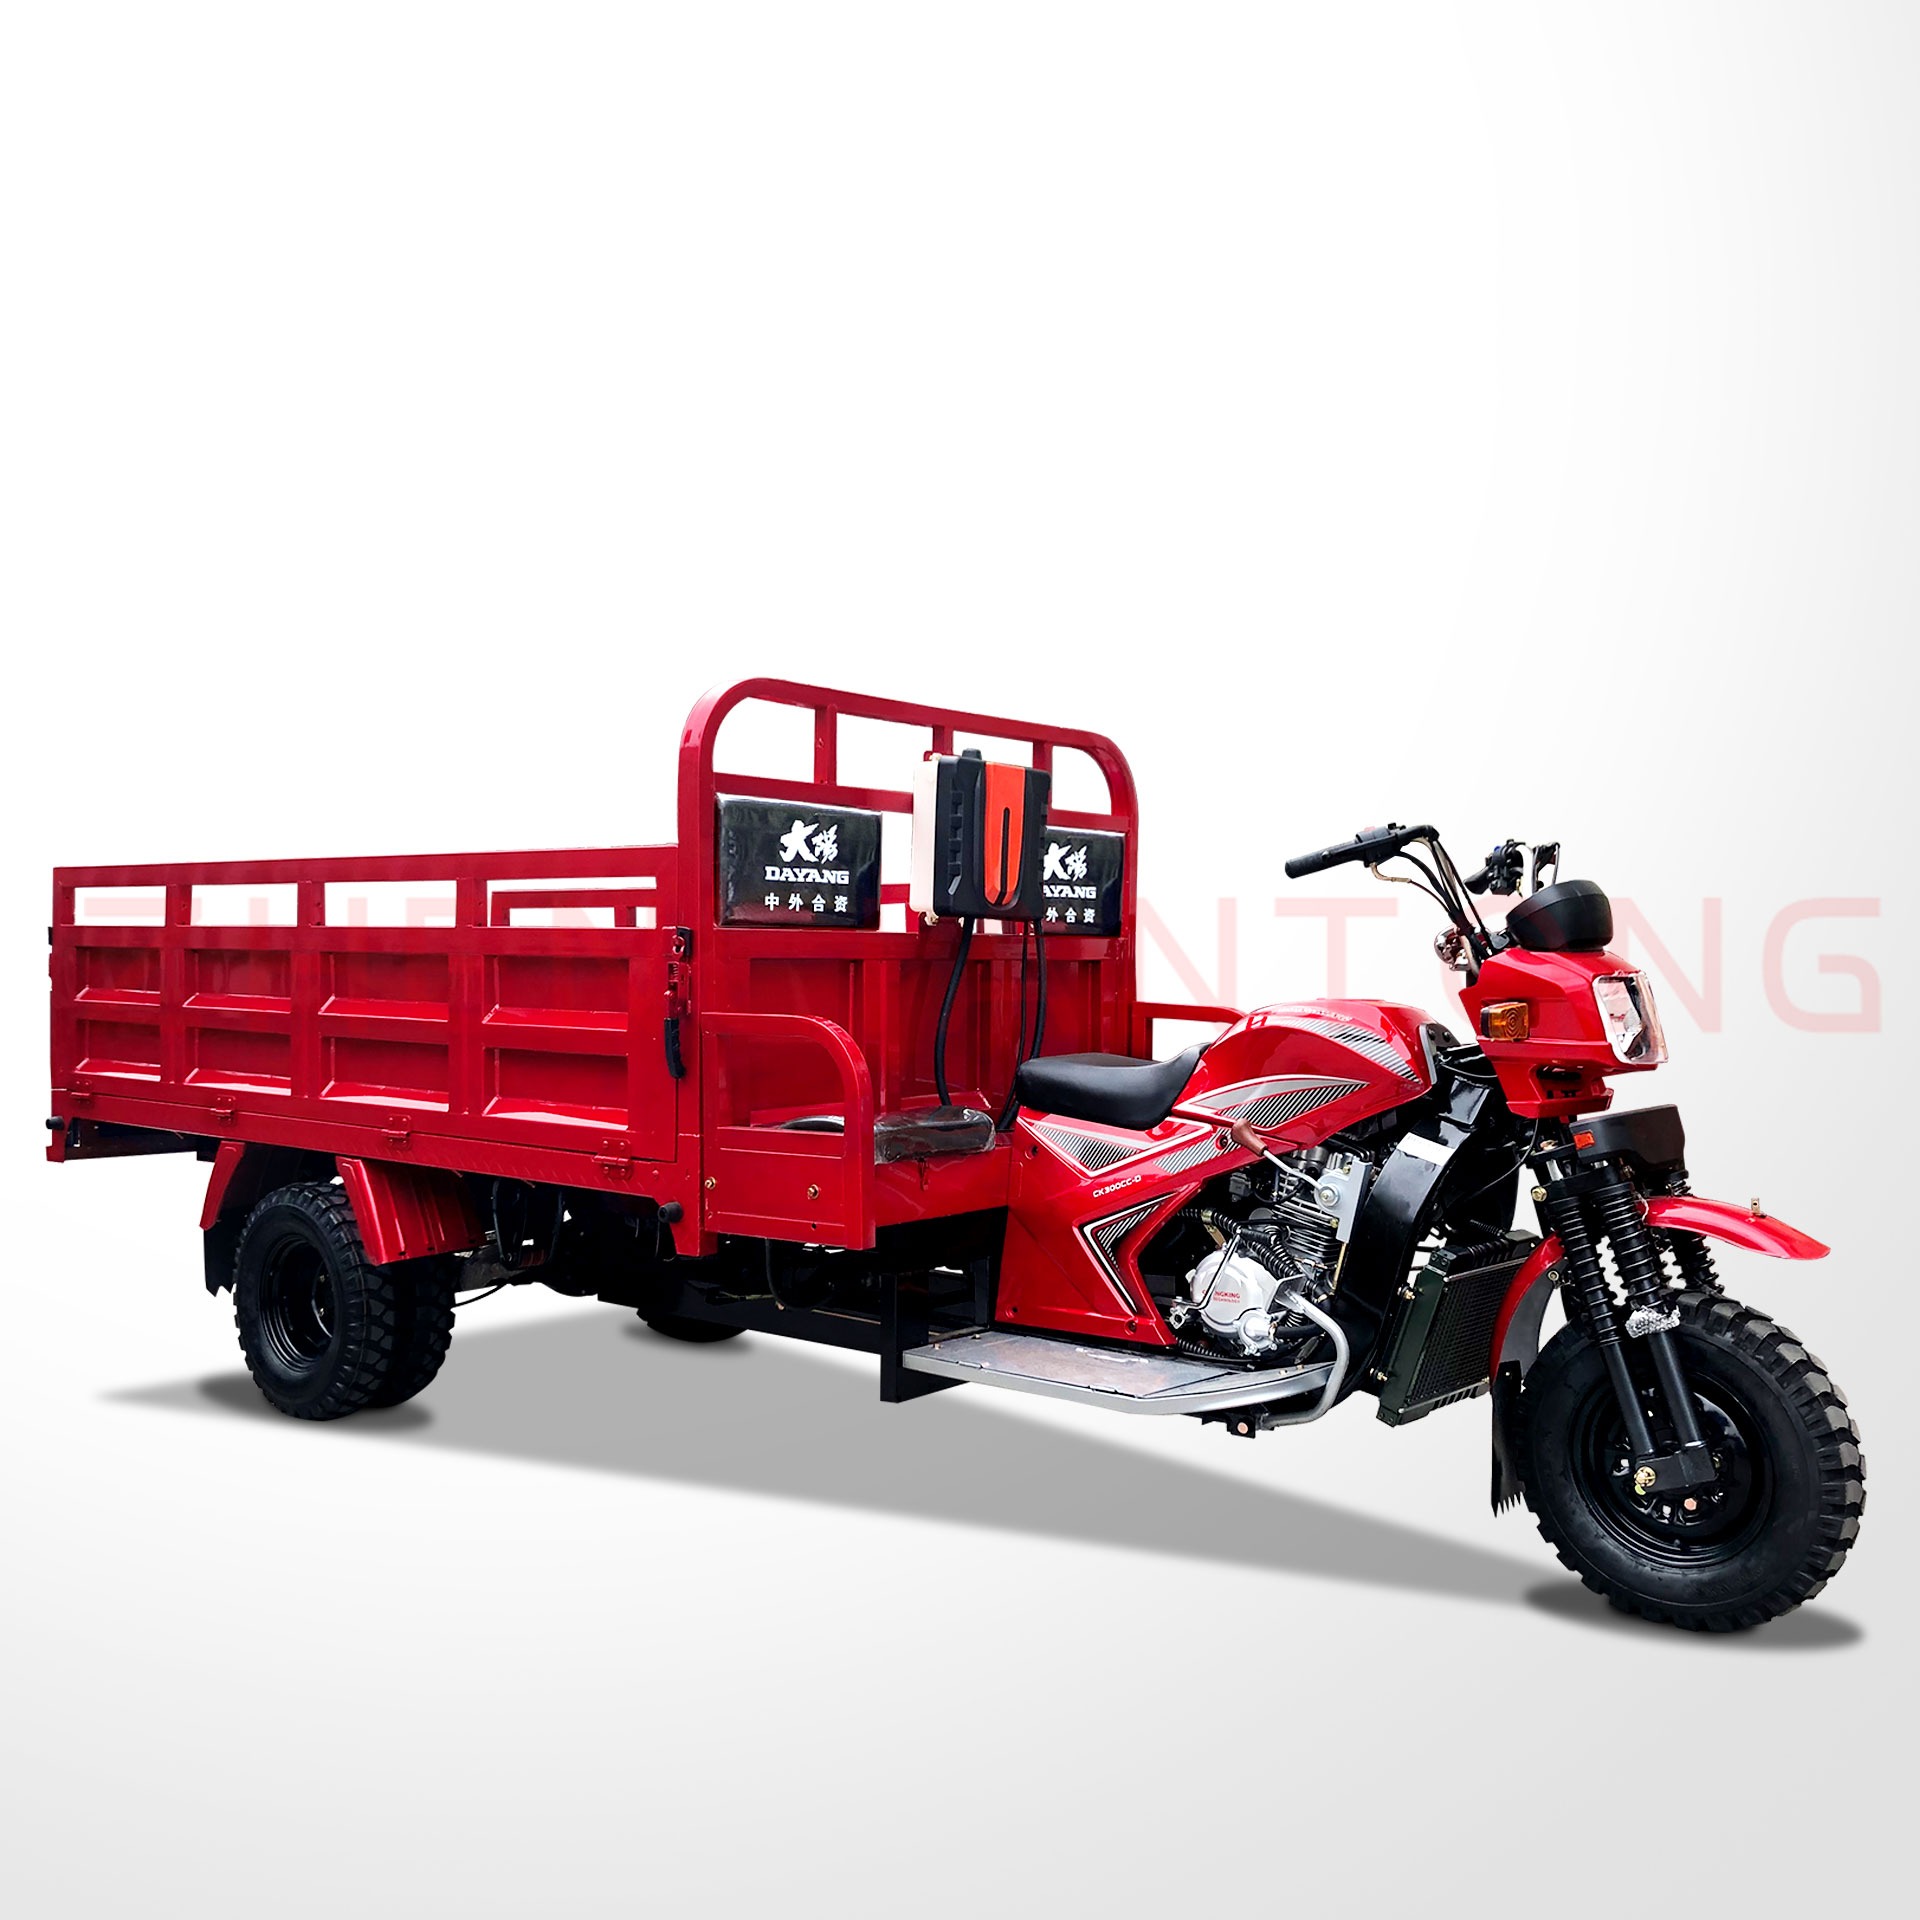 China factory popular inter item morocco trade 250cc chinese cargo motor tricycle trimoto